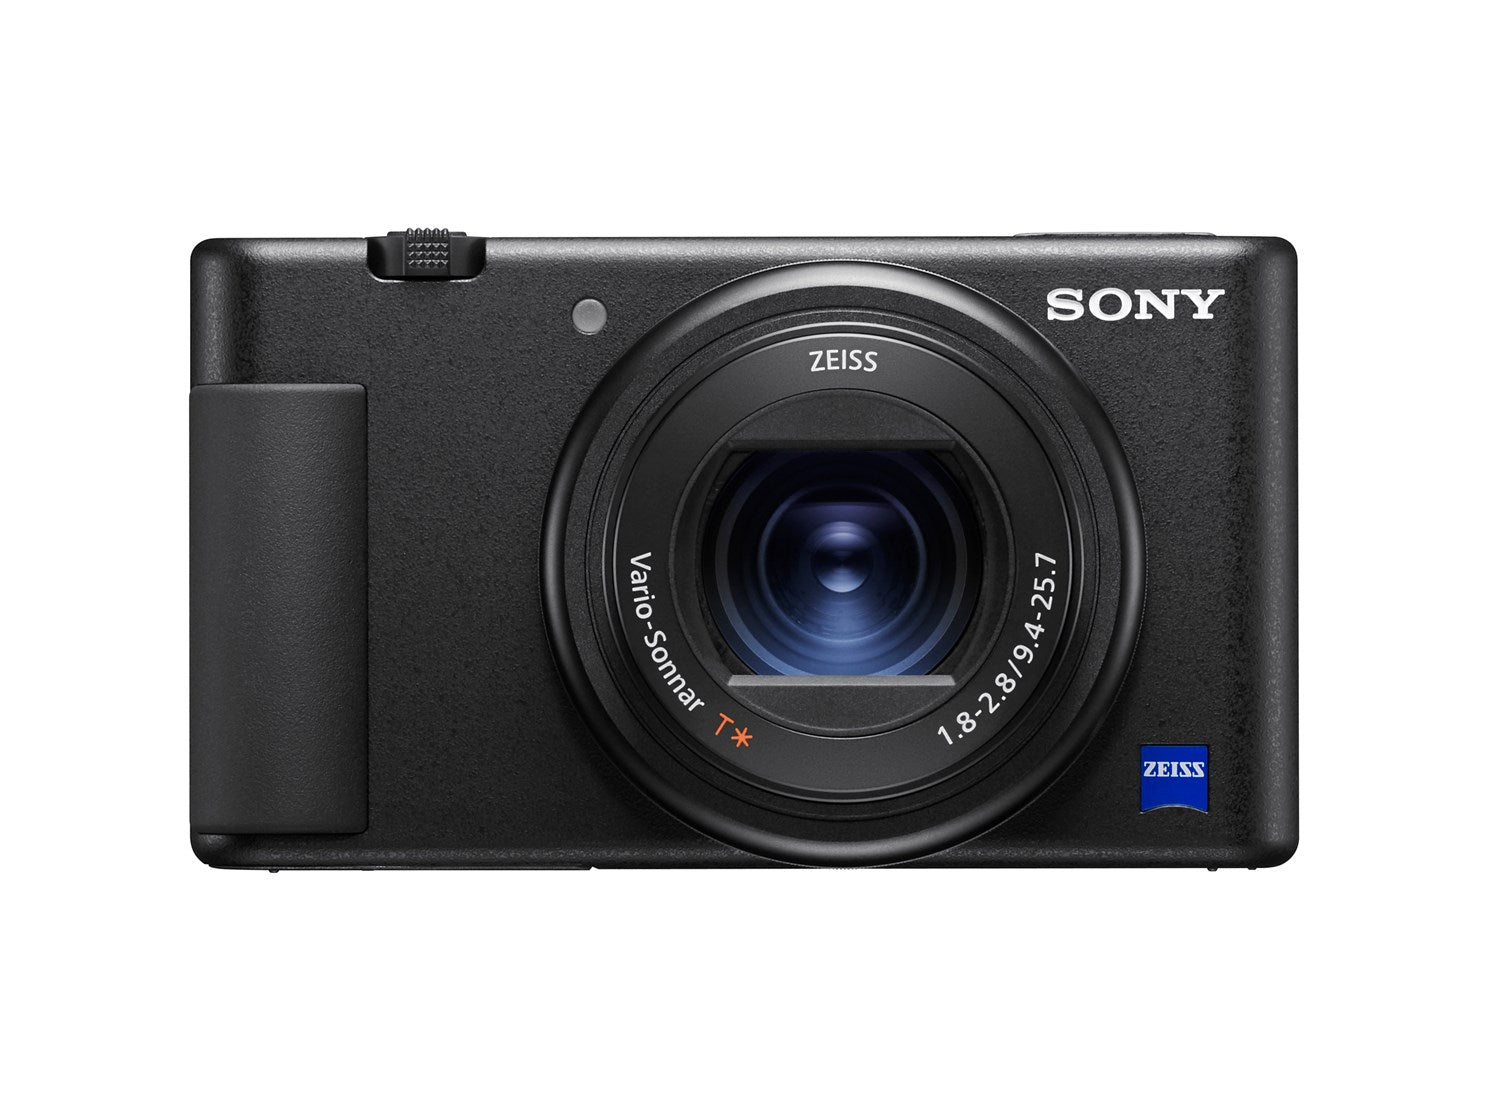 Sony ZV-1 Compact Digital Camera 4K UHD - Black With Wireless Remote Commander GP-VPT2BT - Product Photo 2 - Front view of the camera body